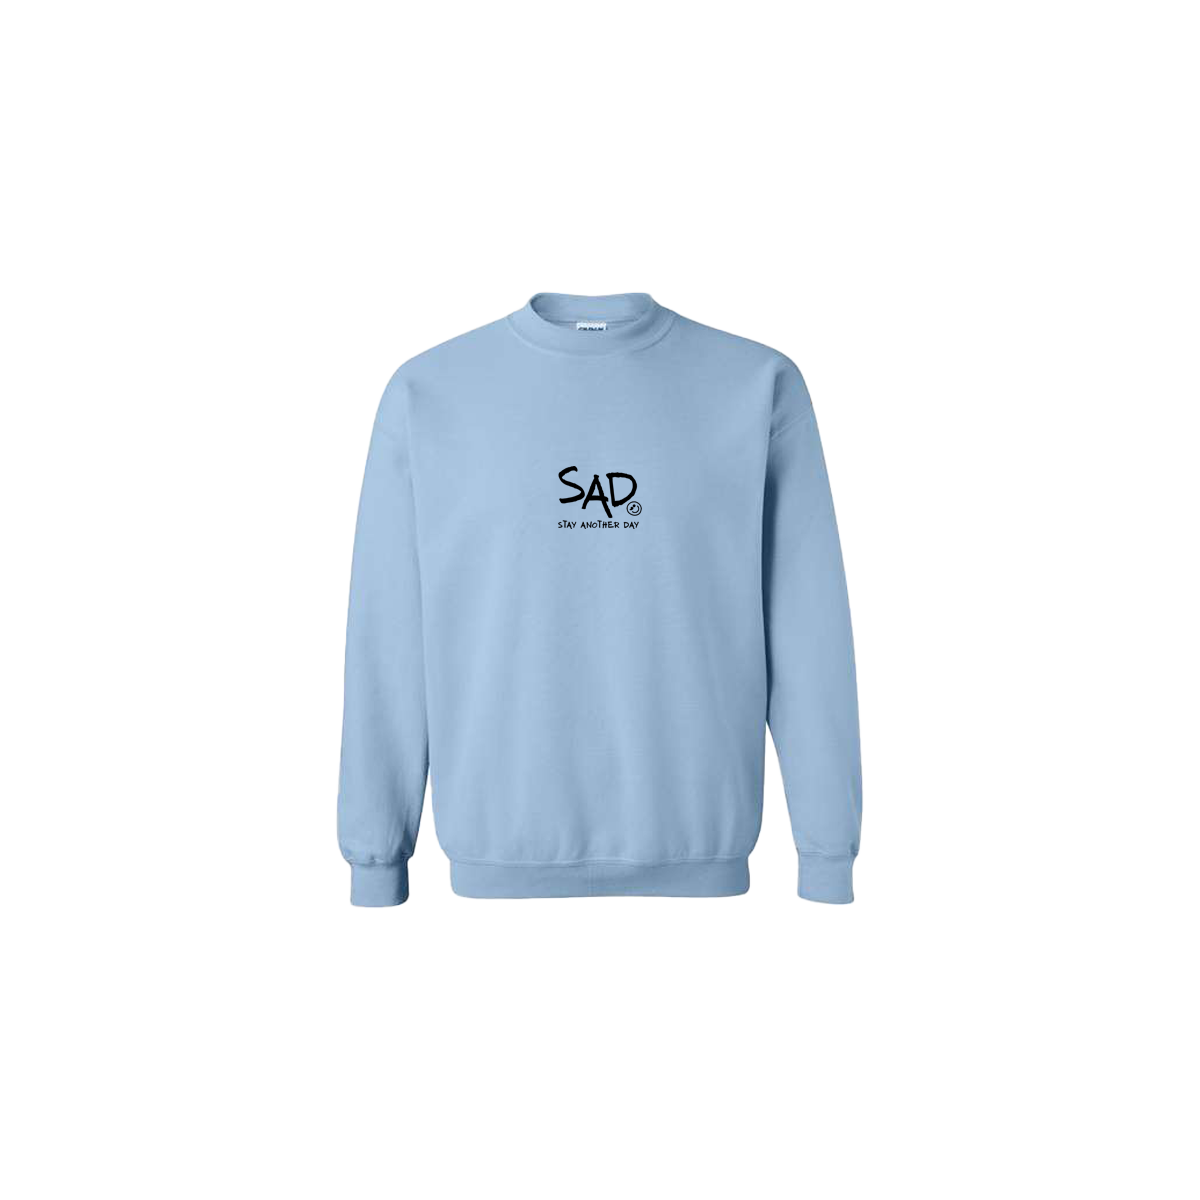 Stay Another Day - SAD Logo Embroidered Light Blue Crewneck - Mental Health Awareness Clothing